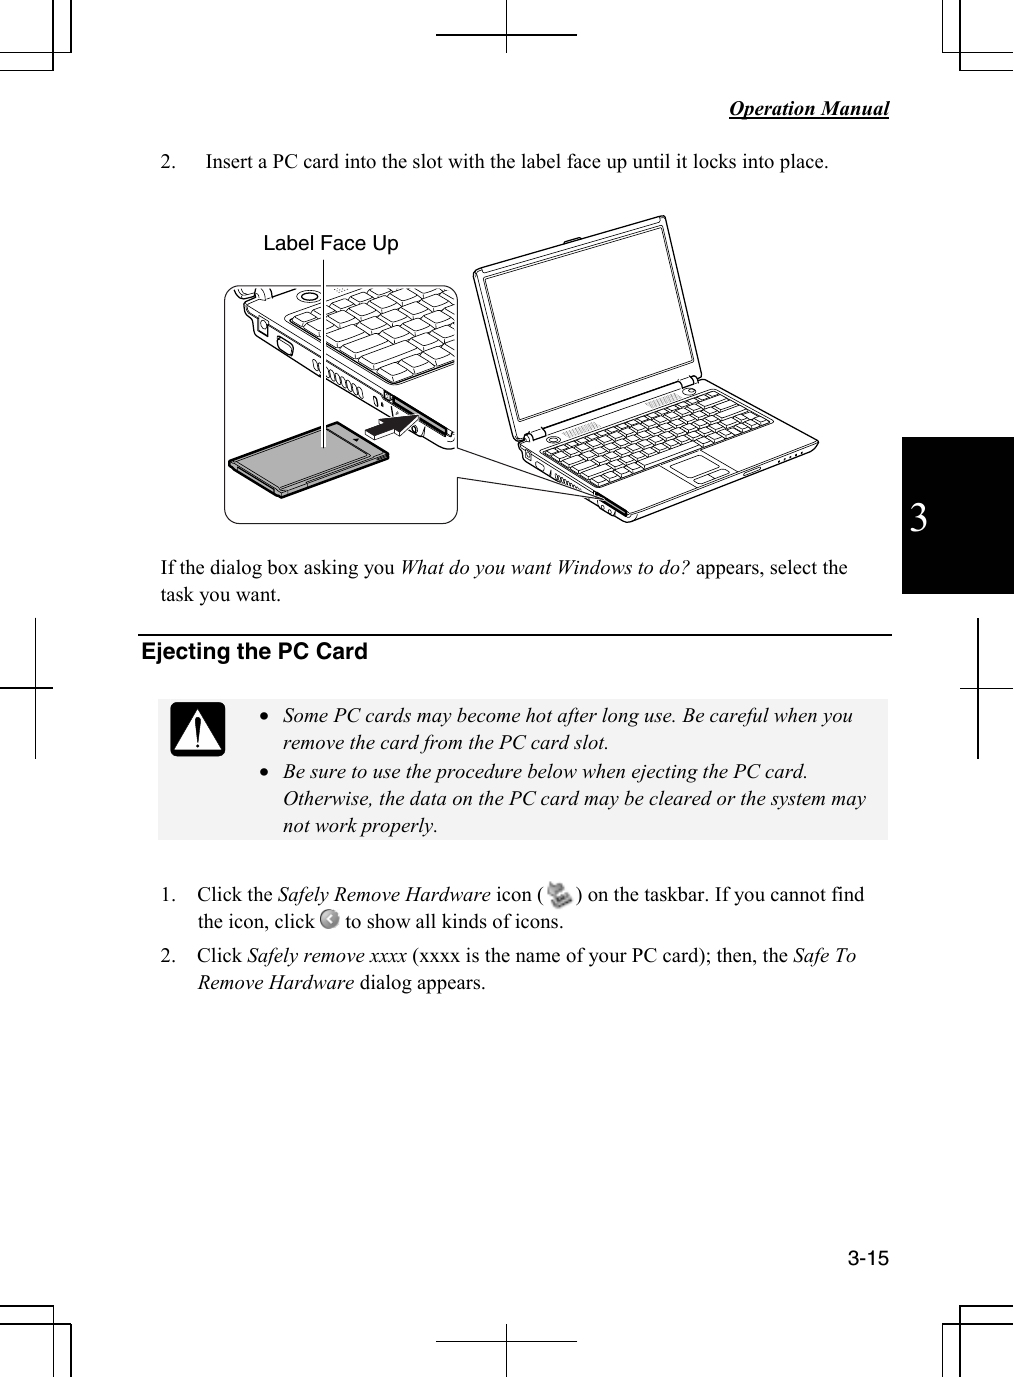   Operation Manual     3-15 3 2. Insert a PC card into the slot with the label face up until it locks into place.    If the dialog box asking you What do you want Windows to do? appears, select the task you want.  Ejecting the PC Card   • Some PC cards may become hot after long use. Be careful when you remove the card from the PC card slot. • Be sure to use the procedure below when ejecting the PC card. Otherwise, the data on the PC card may be cleared or the system may not work properly.  1.    Click the Safely Remove Hardware icon (      ) on the taskbar. If you cannot find the icon, click   to show all kinds of icons.  2.    Click Safely remove xxxx (xxxx is the name of your PC card); then, the Safe To Remove Hardware dialog appears.       Label Face Up 